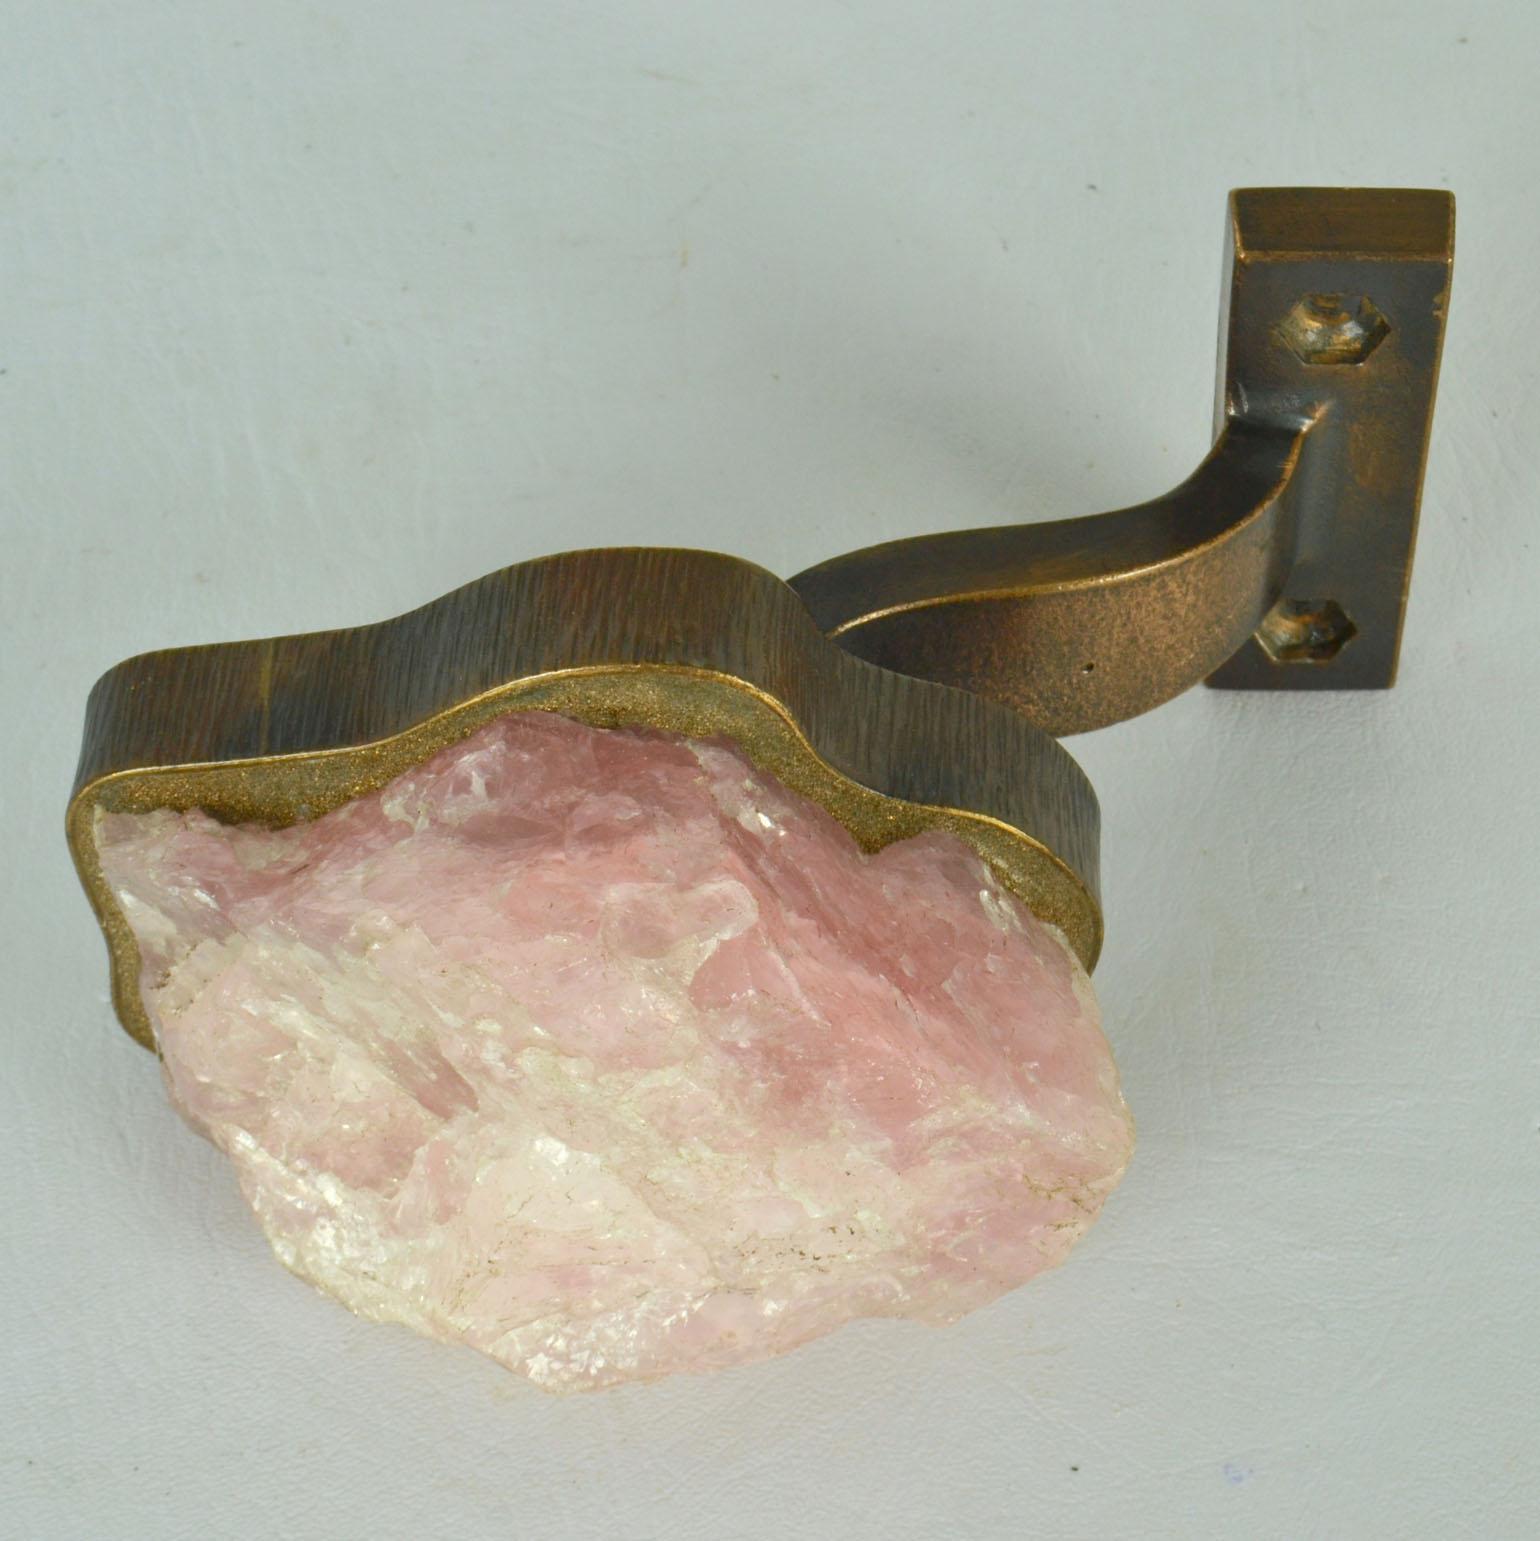 Rose Quartz and Bronze push and pull door handle, made from a semi precious stone in soft pink, set into a bronze holder that follows its natural shape and is made to measure. It is a piece of jewelry for your door.
The handle is attached to a